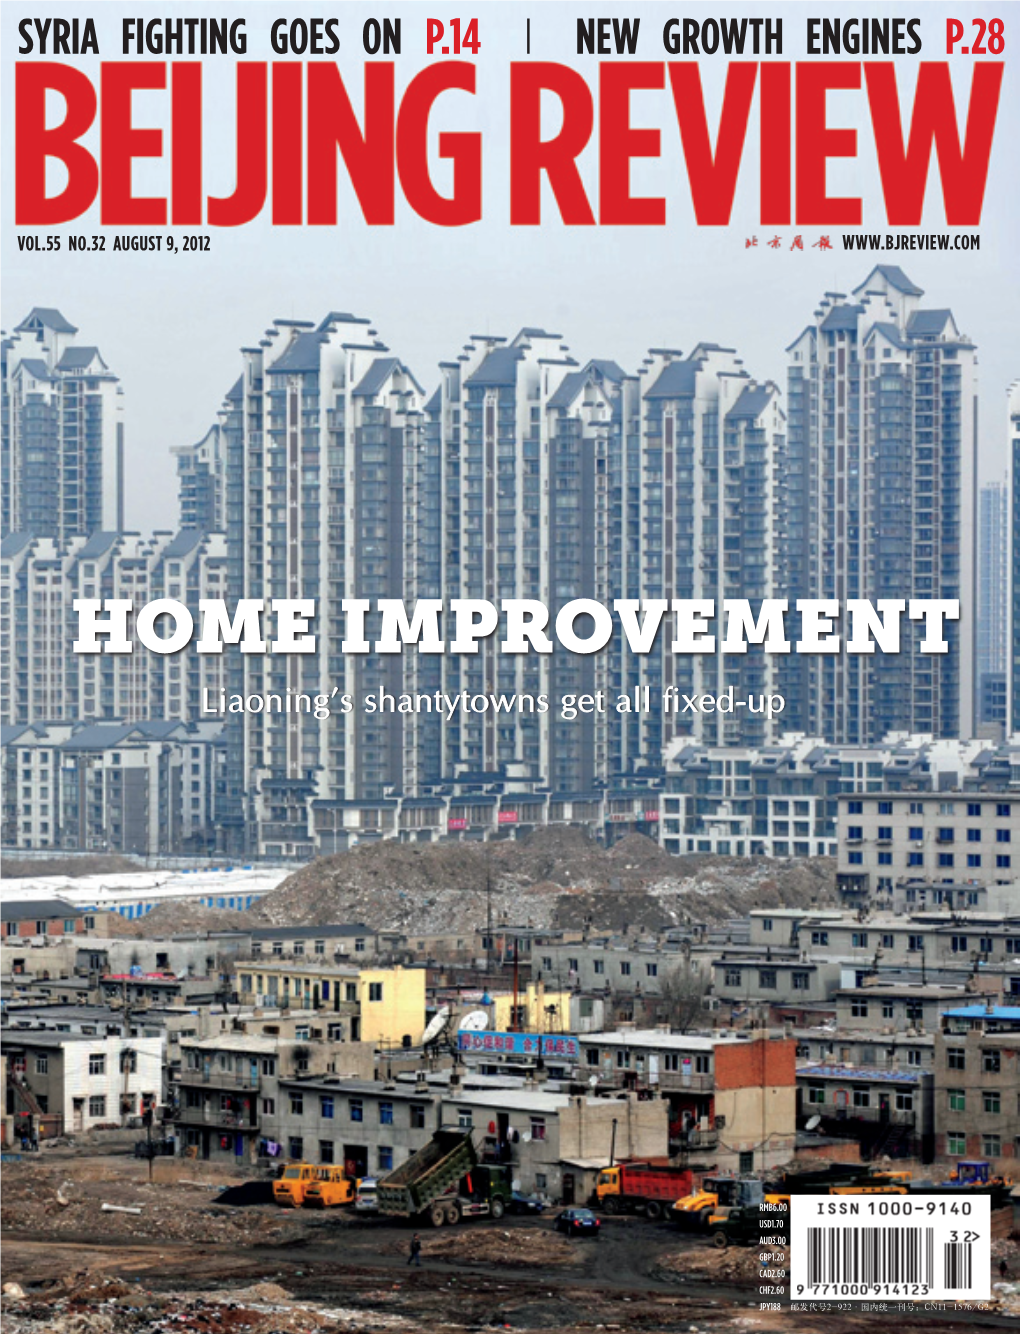 HOME IMPROVEMENT Liaoning’S Shantytowns Get All Fixed-Up